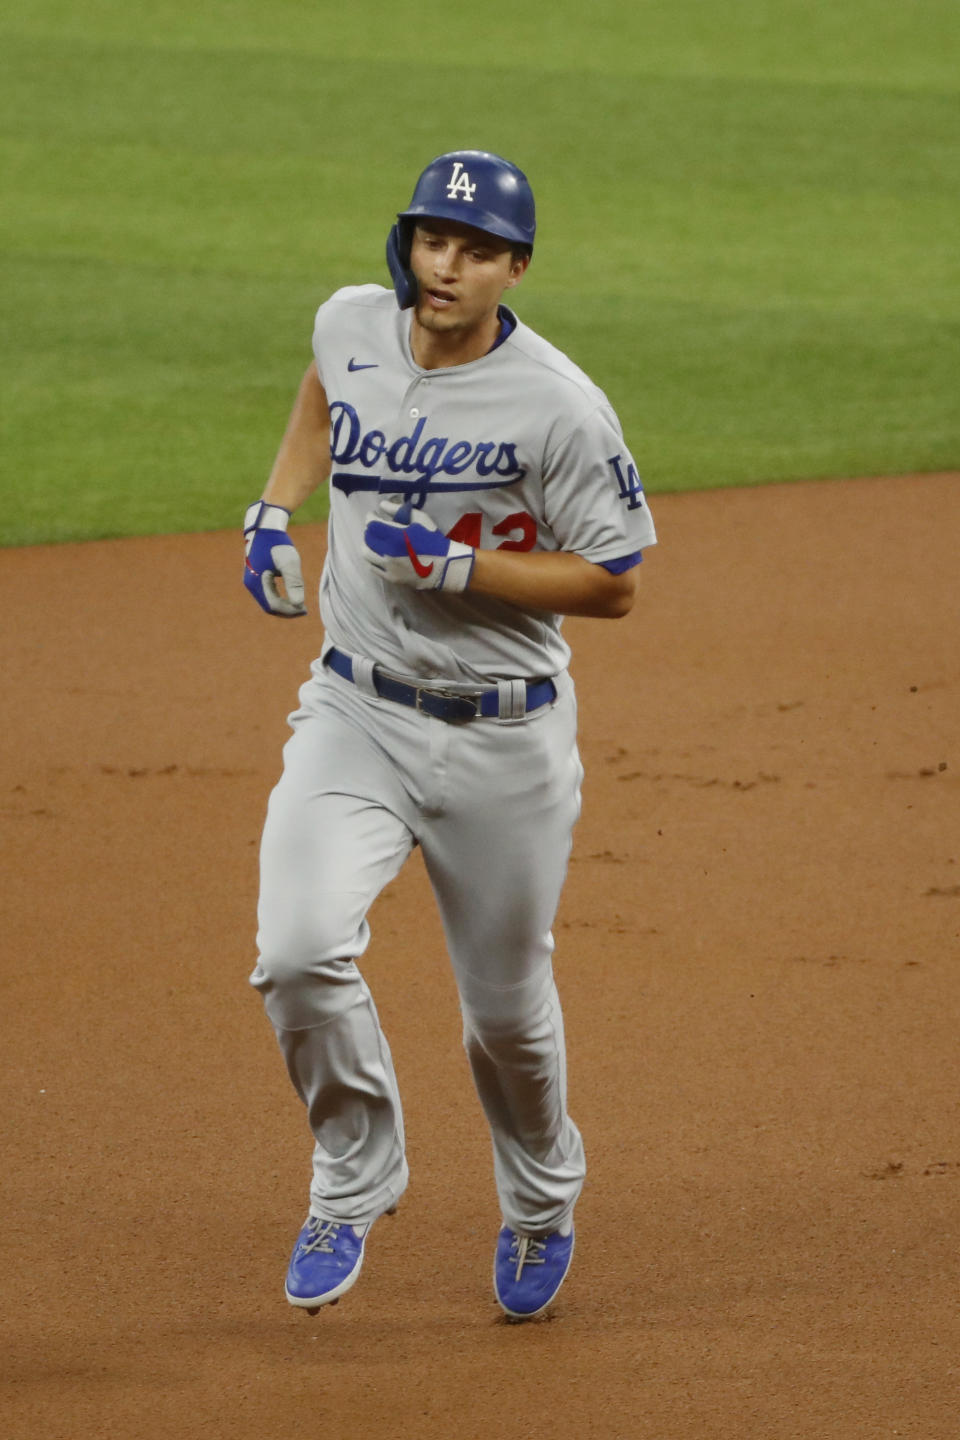 Los Angeles Dodgers' Corey Seager rounds the bases after a home run in the first inning of a baseball game against the Texas Rangers in Arlington, Texas, Sunday, Aug. 30, 2020. (AP Photo/Roger Steinman)